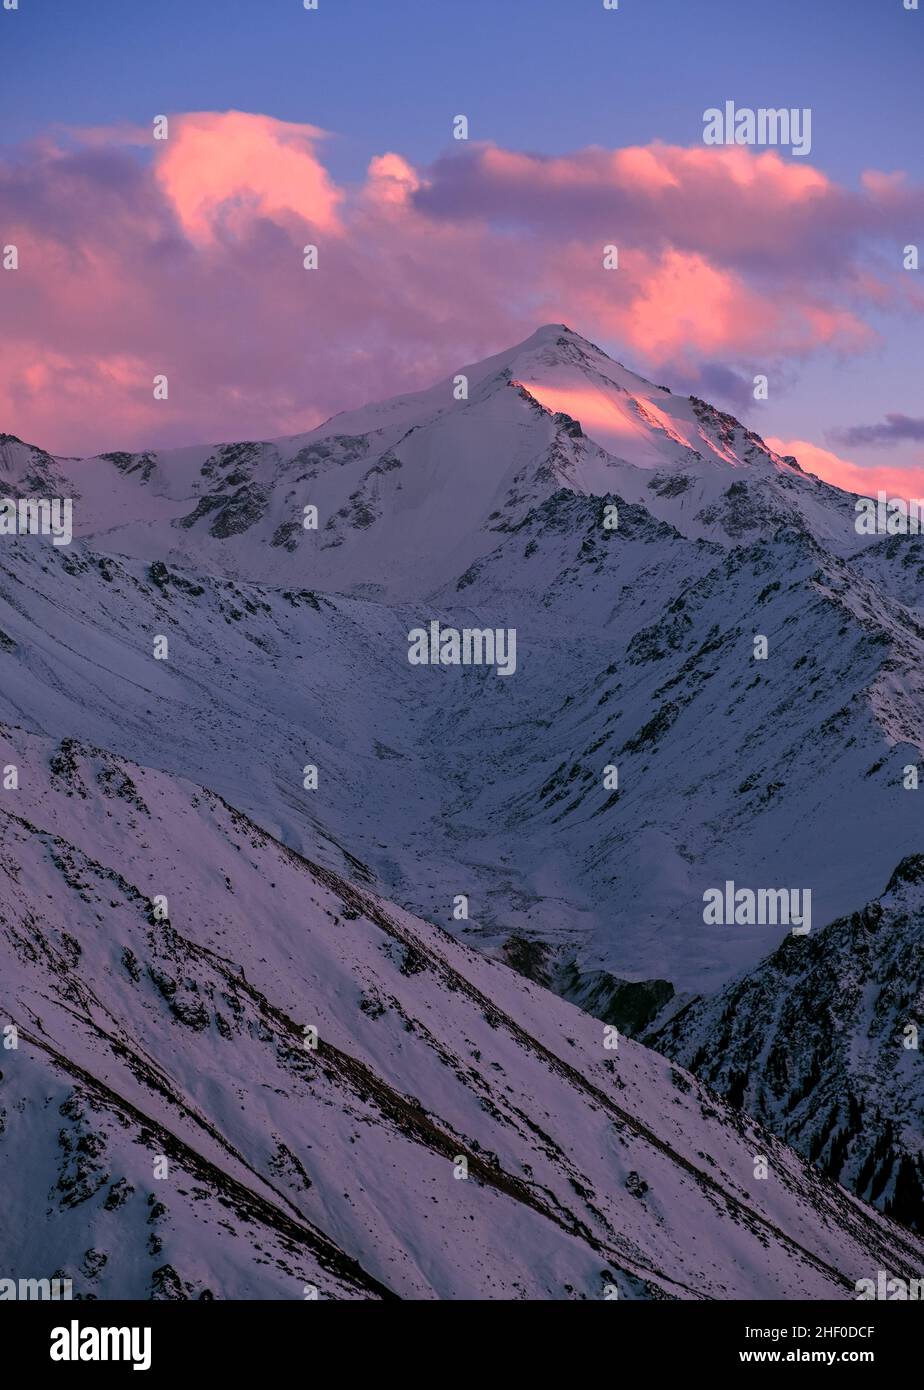 Snow-capped mountains at sunset; mountain peak against a blue sky with sunset clouds Stock Photo